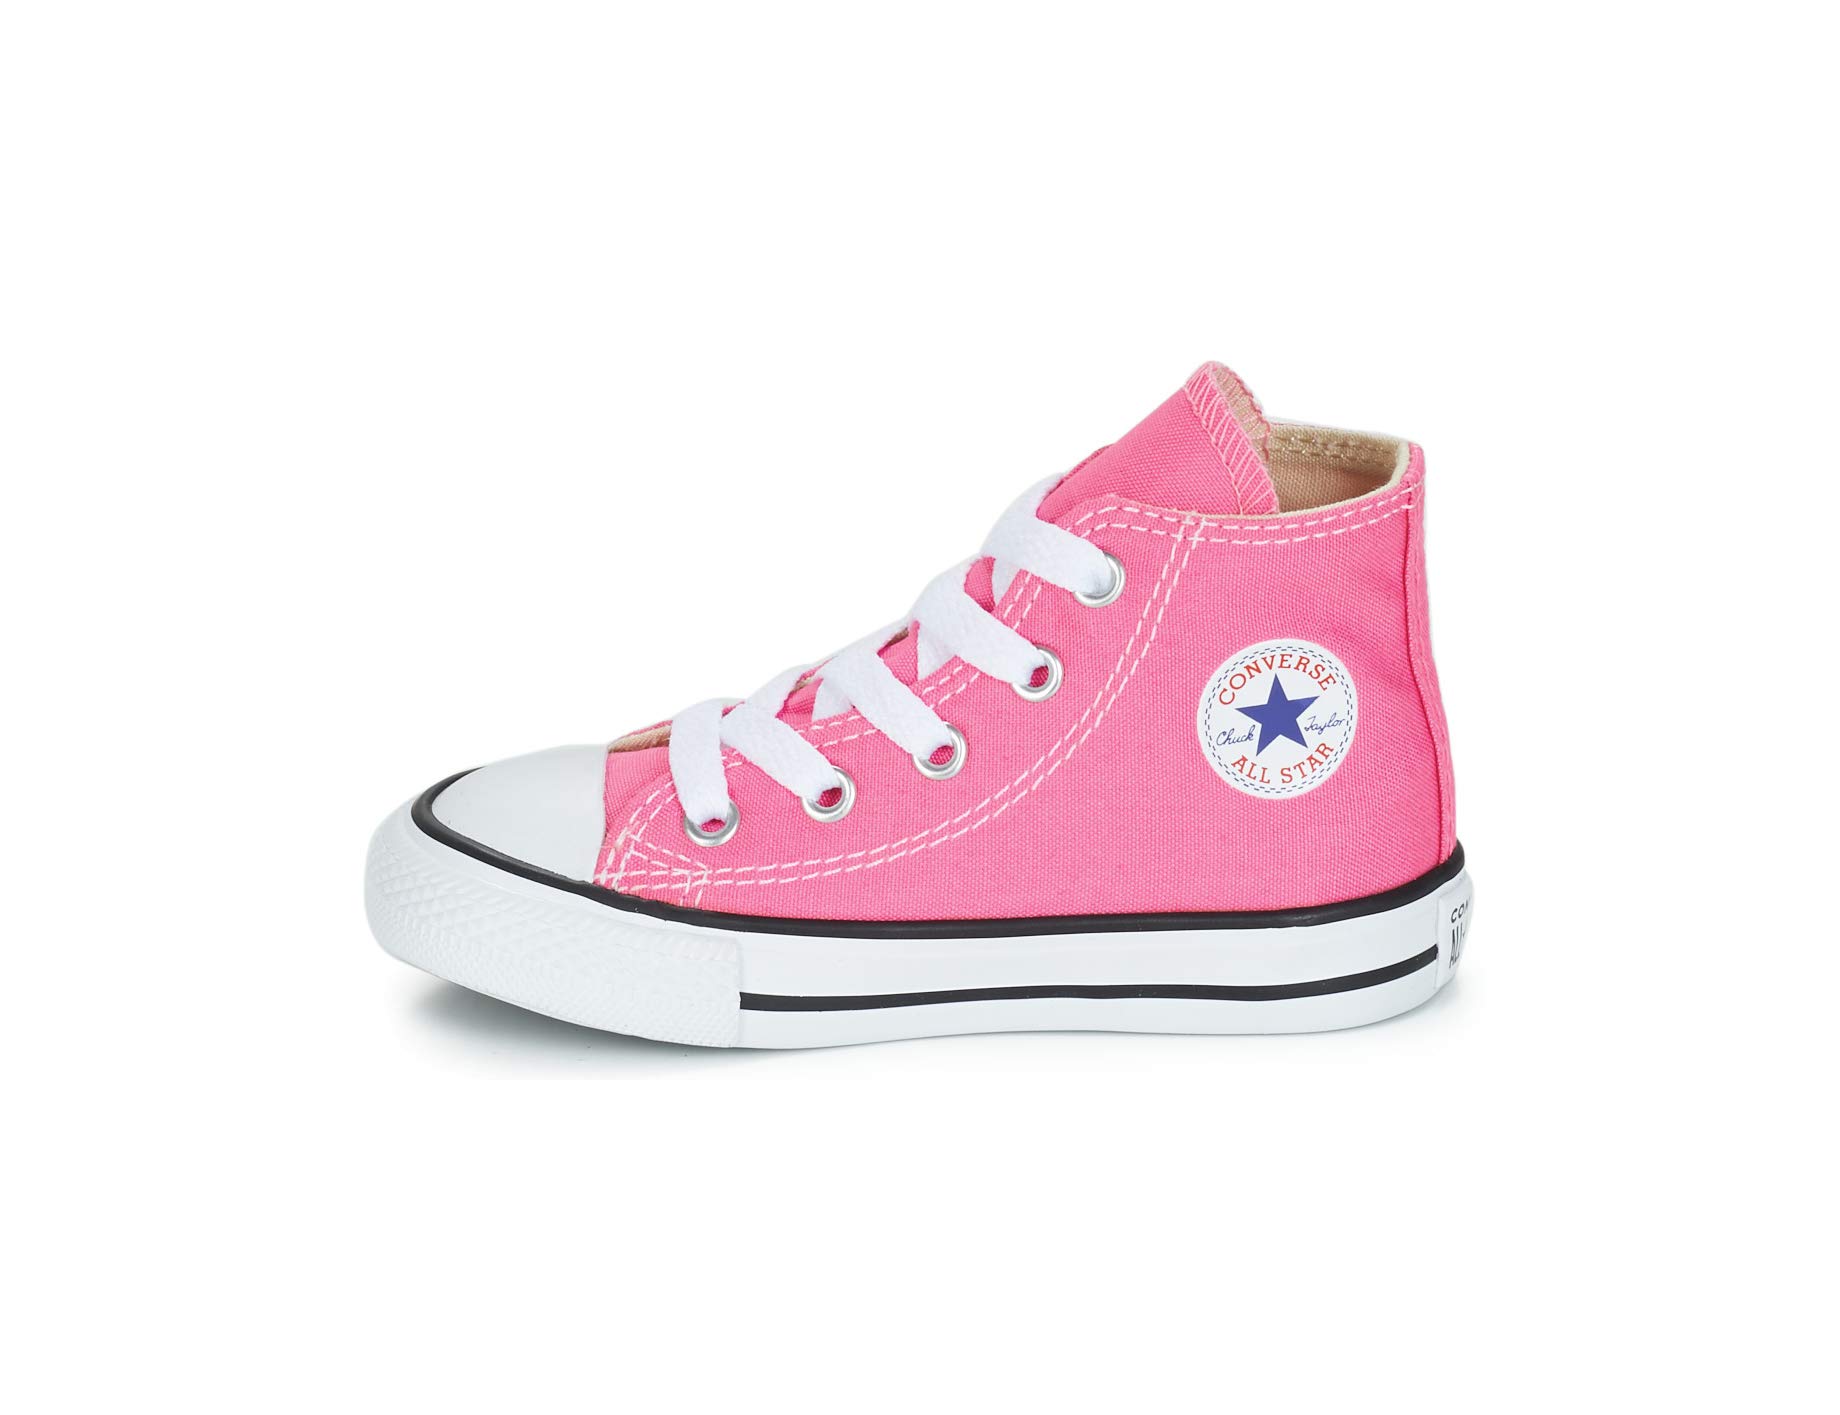 Converse Chuck Taylor All Star High Top Infant Shoes Pink 7j234